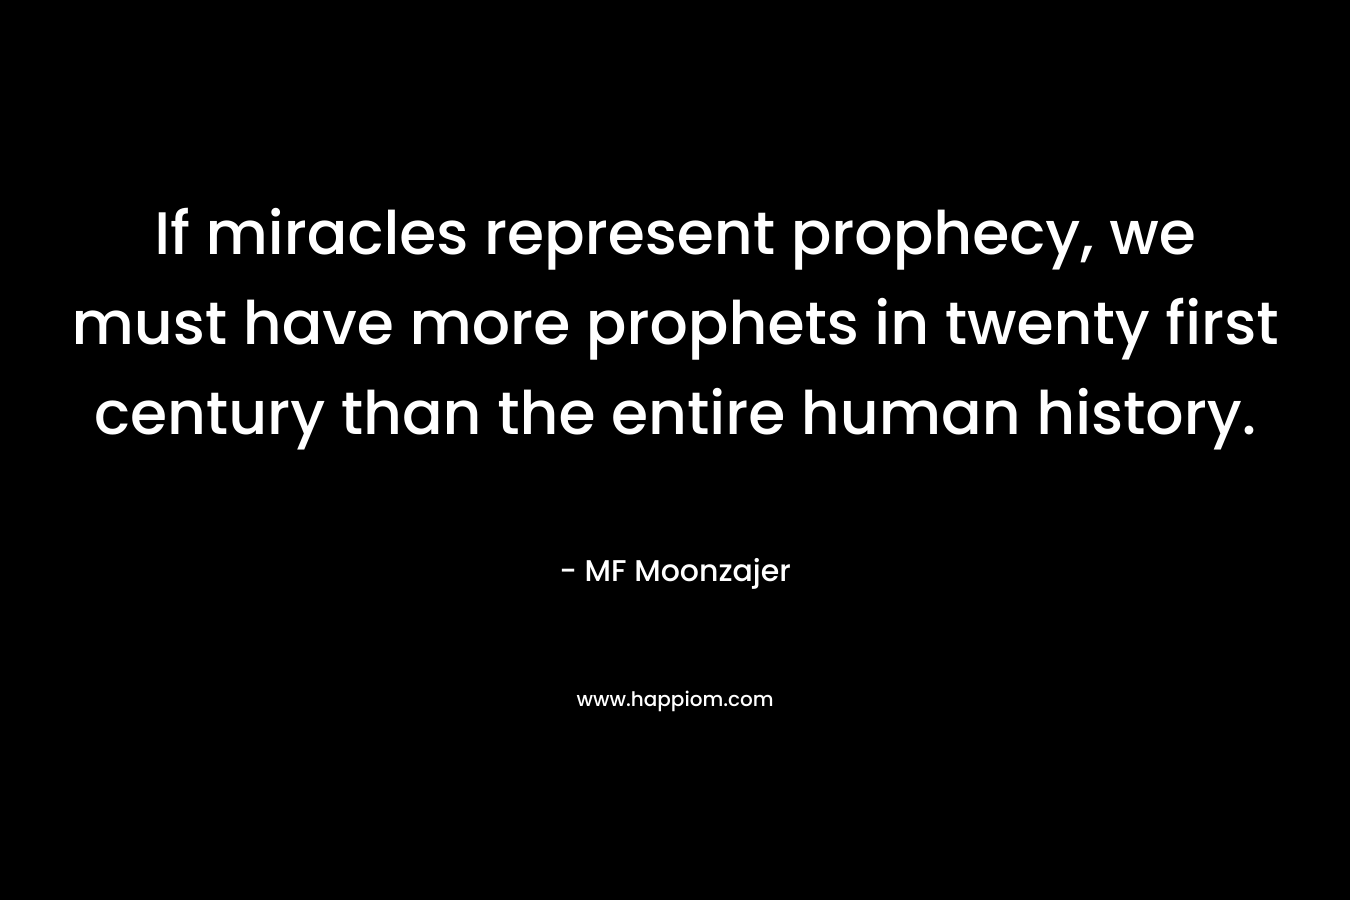 If miracles represent prophecy, we must have more prophets in twenty first century than the entire human history. – MF Moonzajer